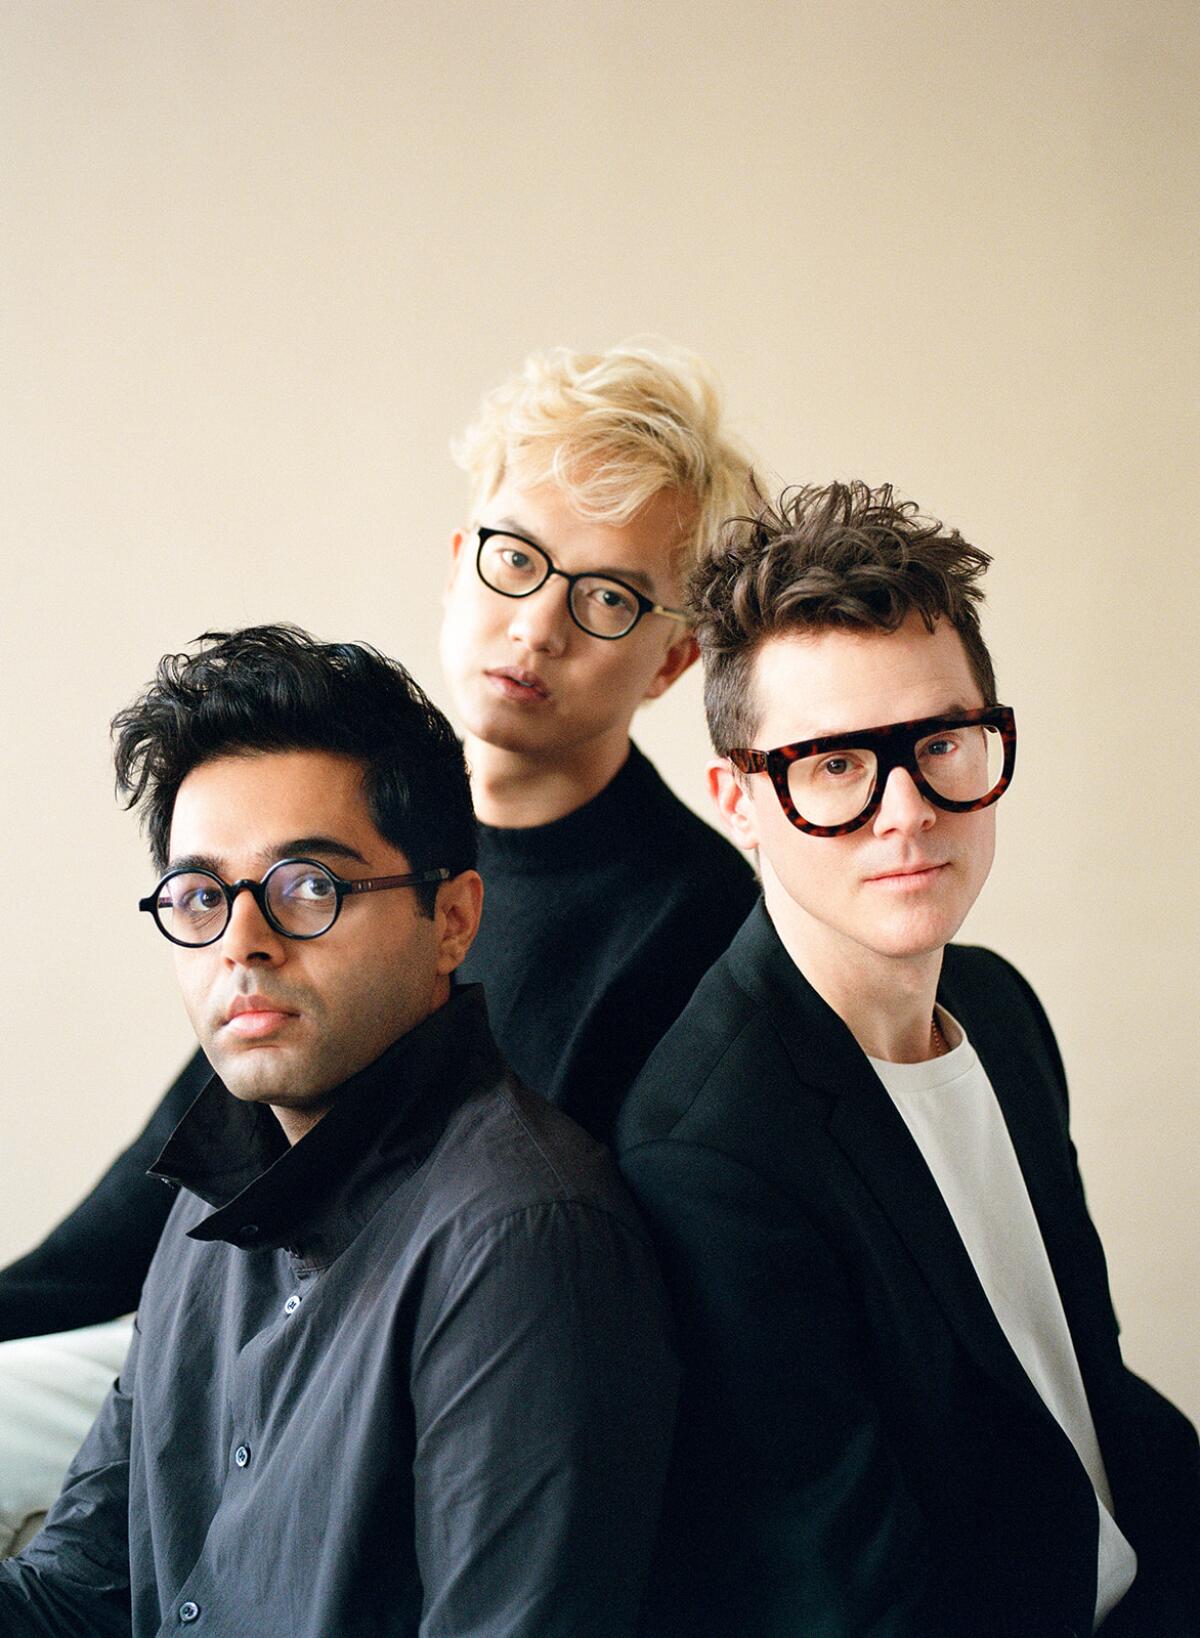 The three members of Son Lux pose for a group photo.